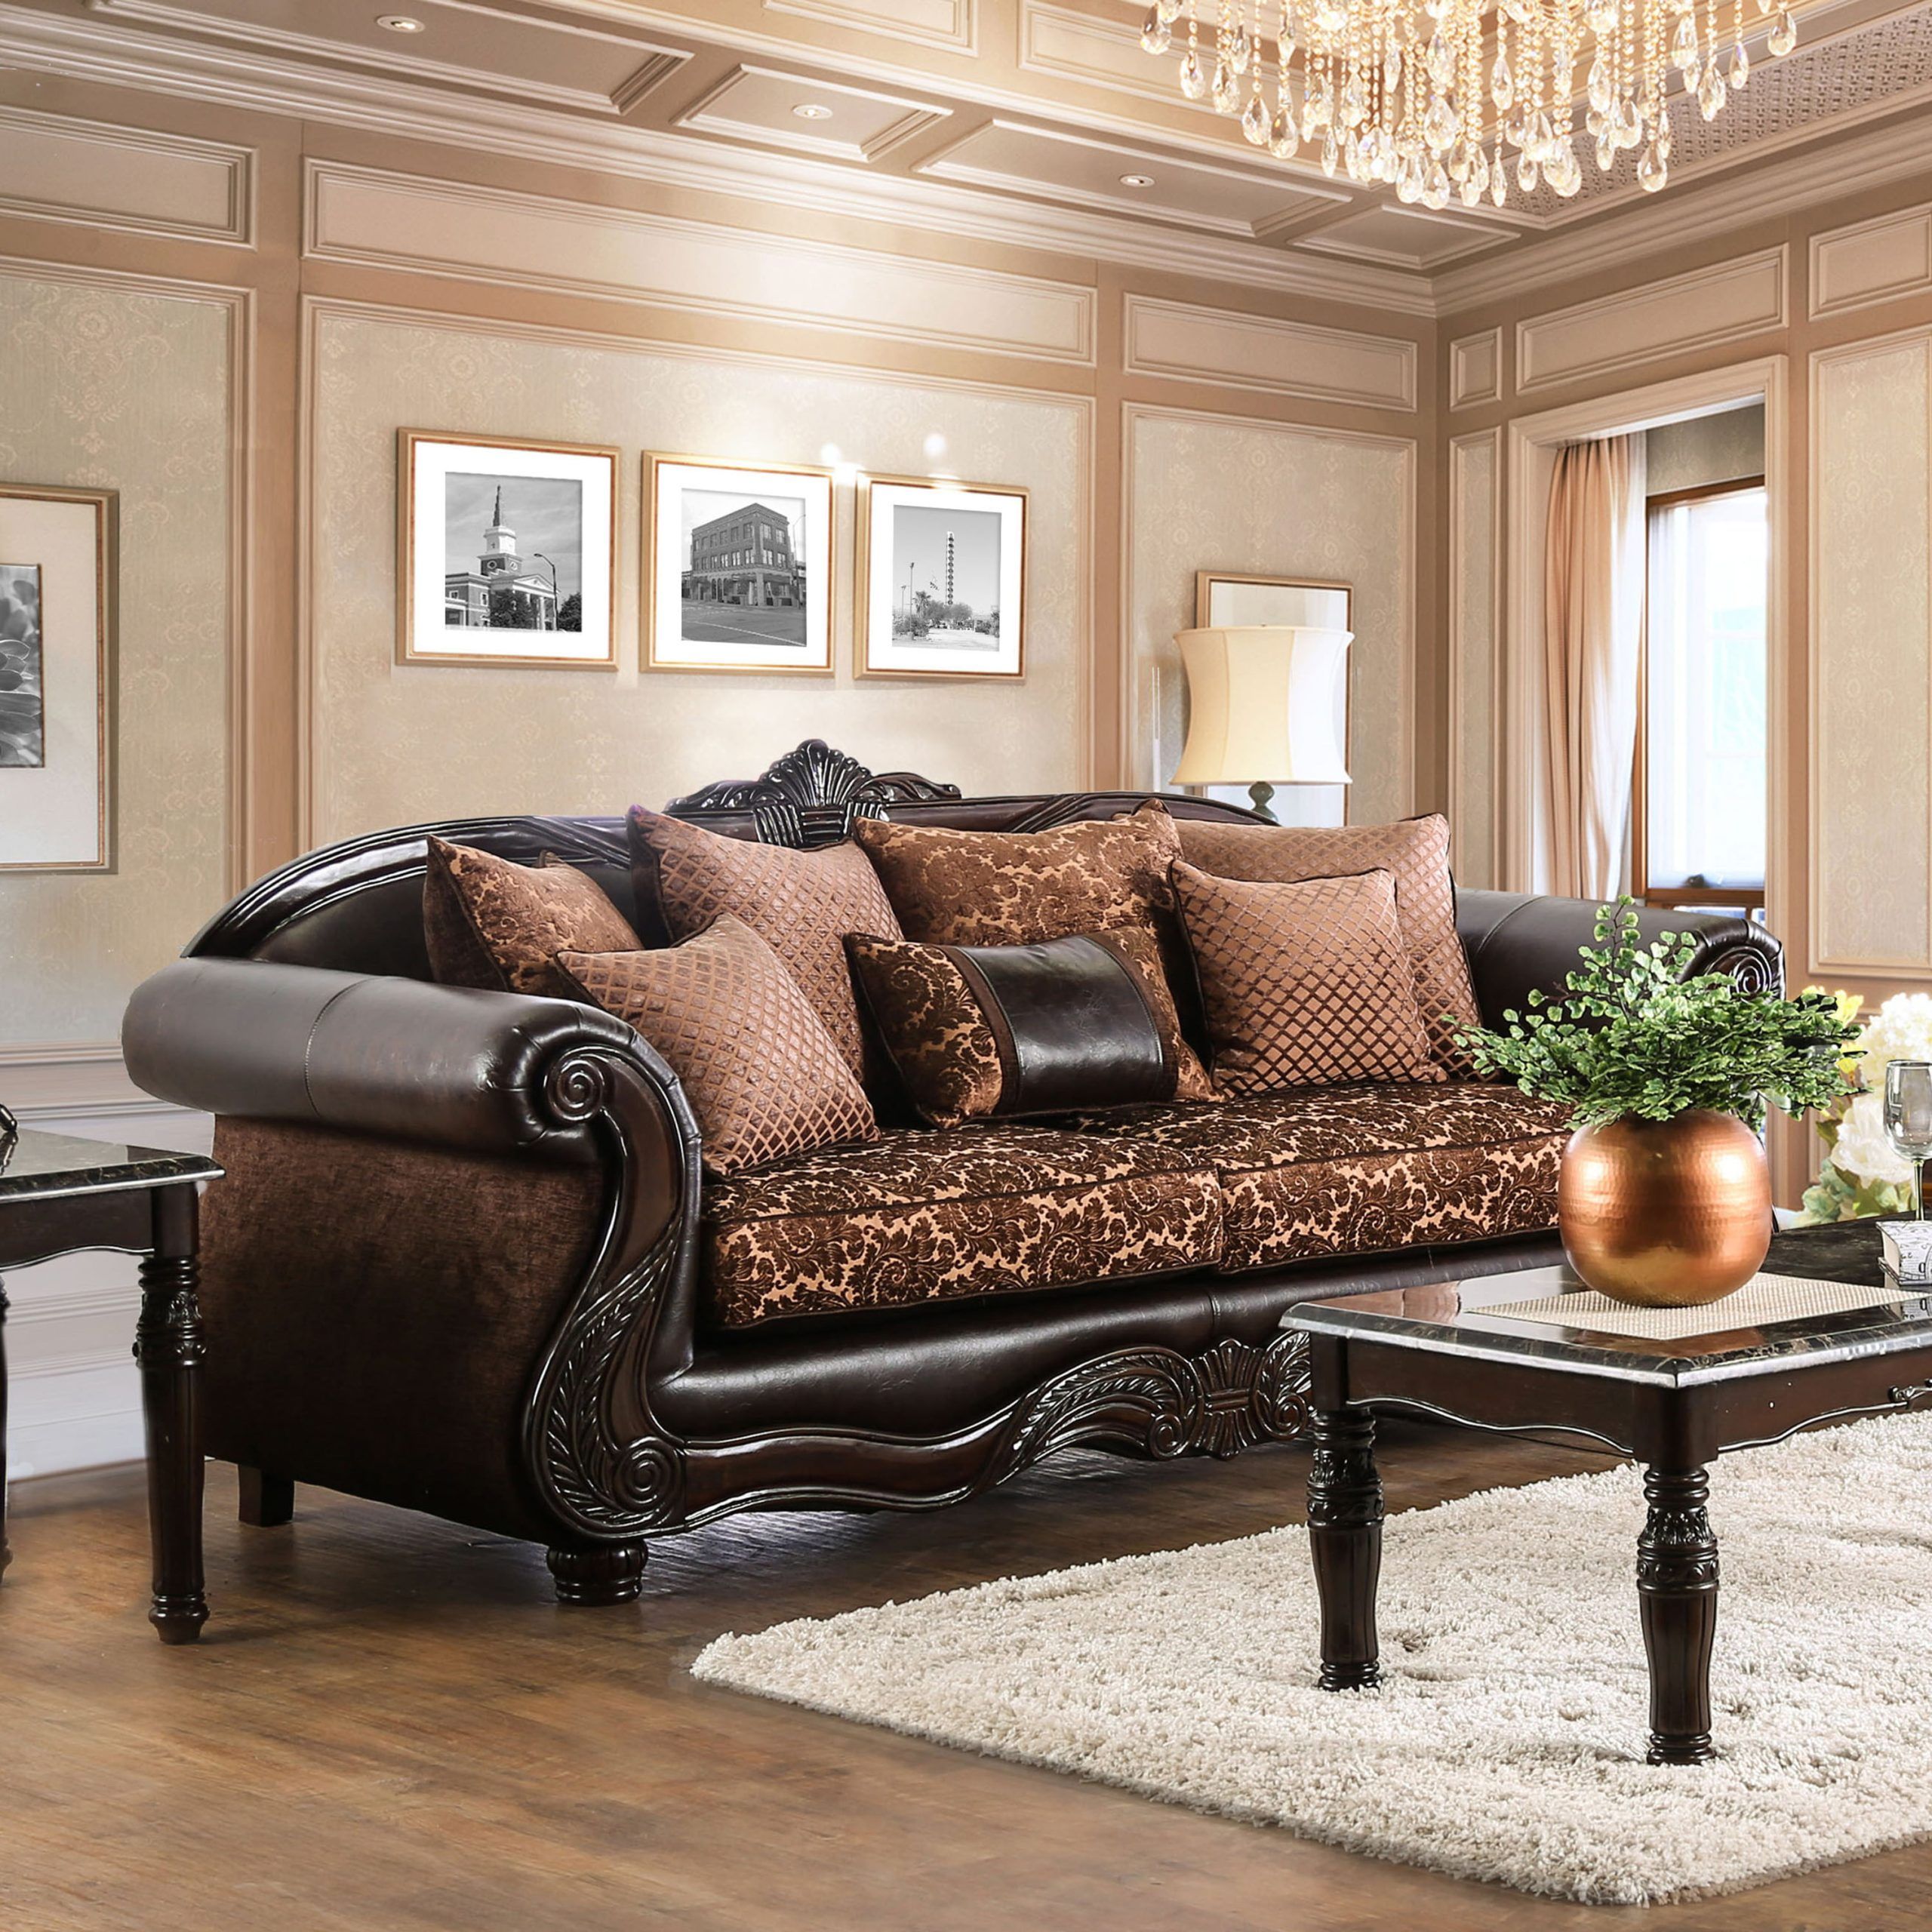 Furniture Of America Traditional Faux Leather Hannon Sofa, Brown Pertaining To Faux Leather Sofas In Dark Brown (View 4 of 20)